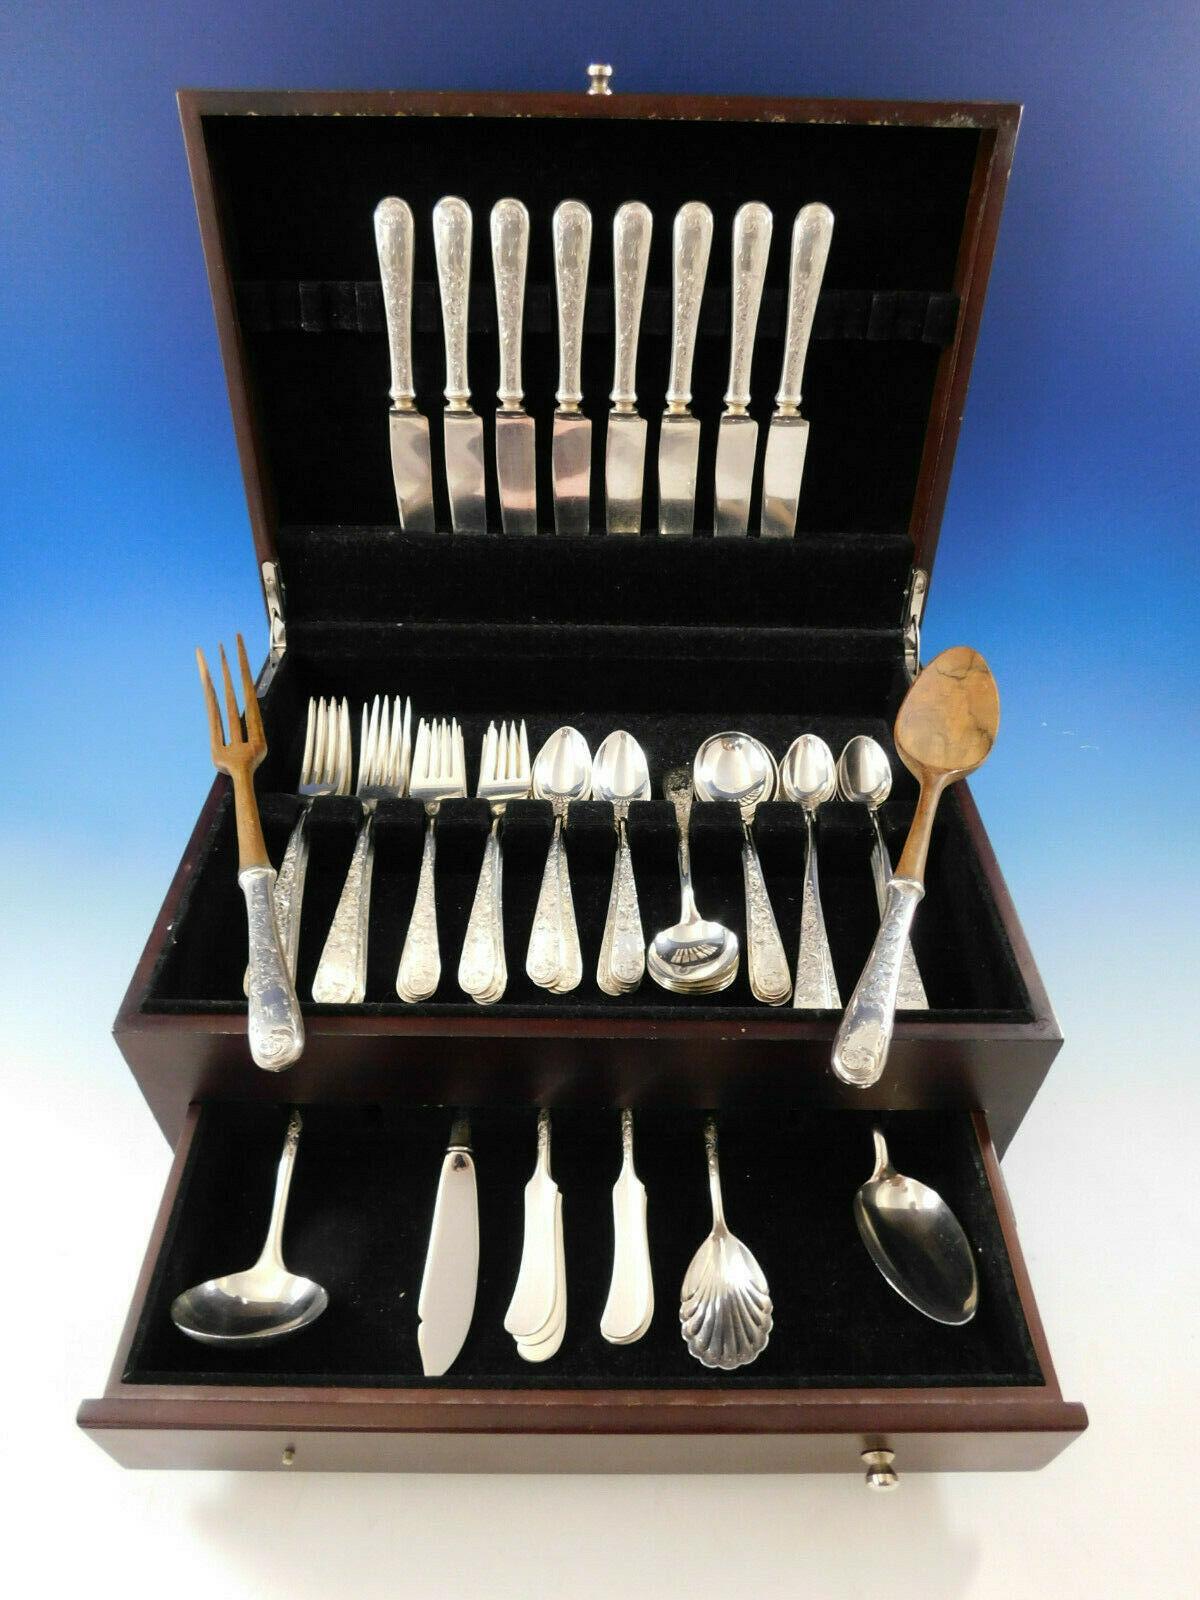 Stunning old Maryland engraved by Kirk sterling silver flatware set, 62 pieces. This set includes:

 8 knives with silver plated blades, 8 7/8